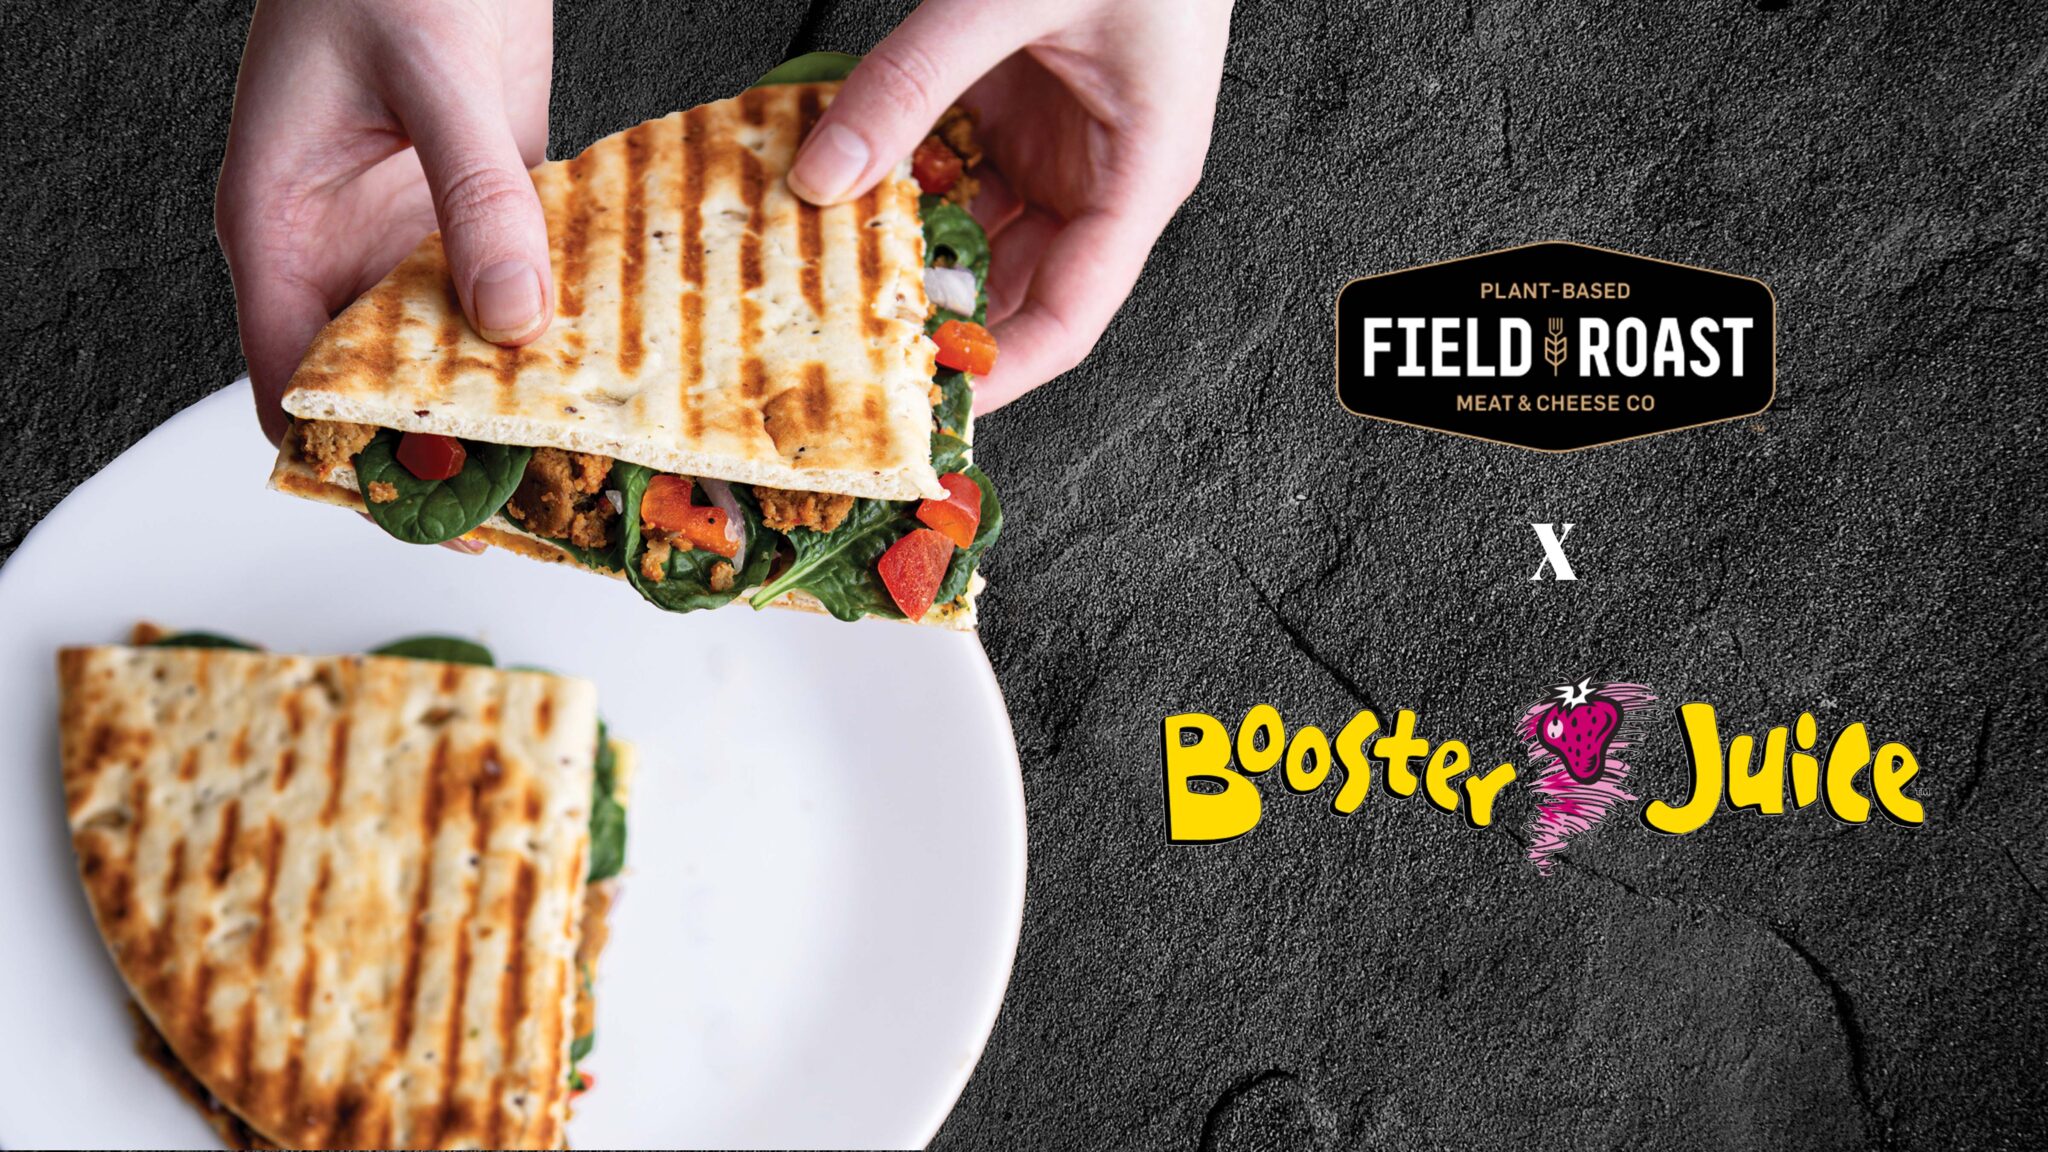 Booster Juice Partners with Field Roast™ to Offer Plant-Based Protein for the First Time